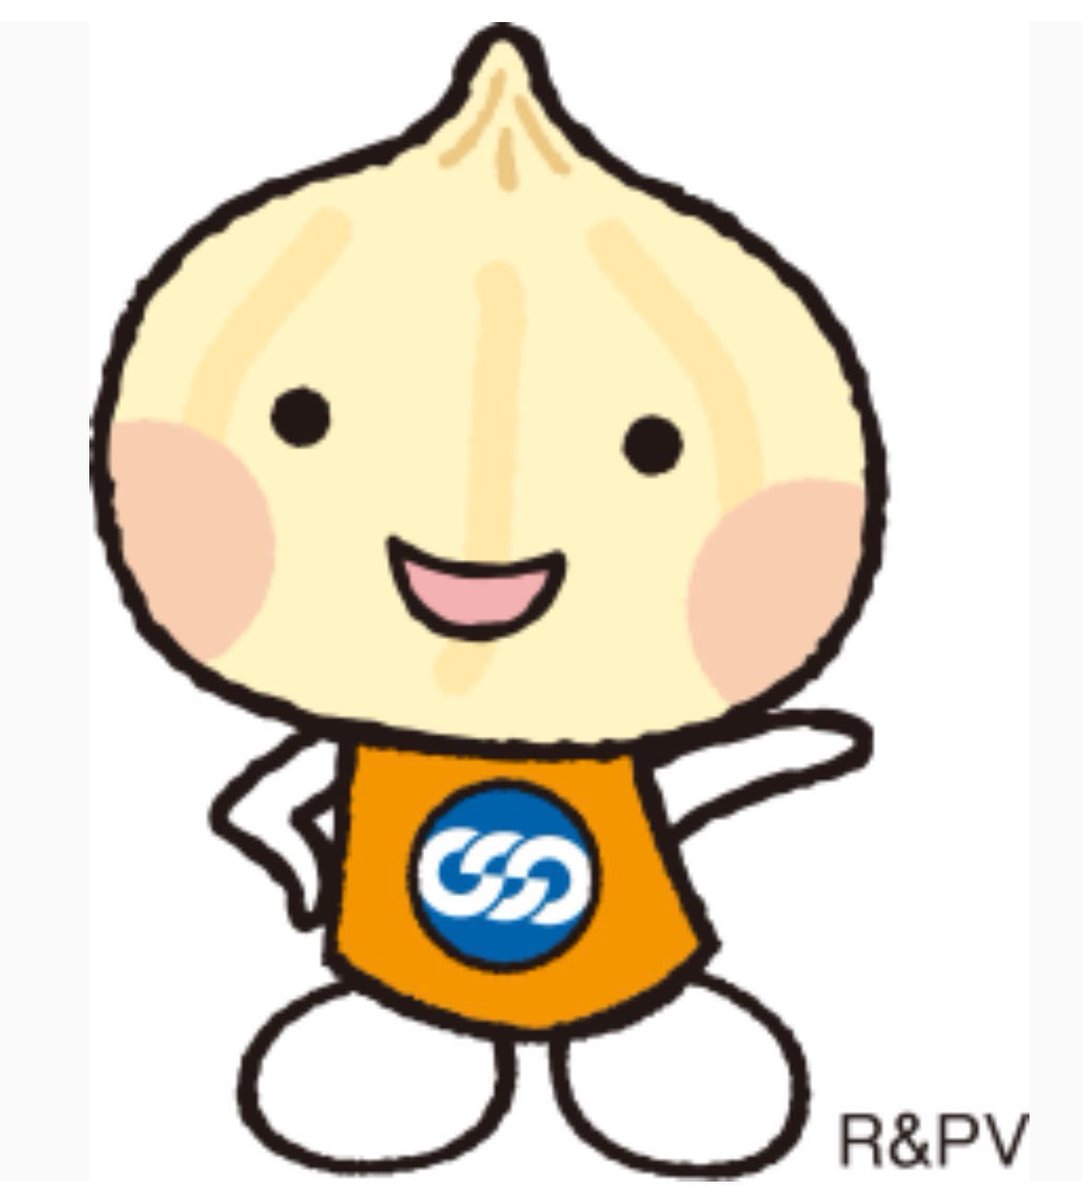 Unionion the union onion, mascot for the Japanese Trade Union Confederation, cheers up those having trouble at work.